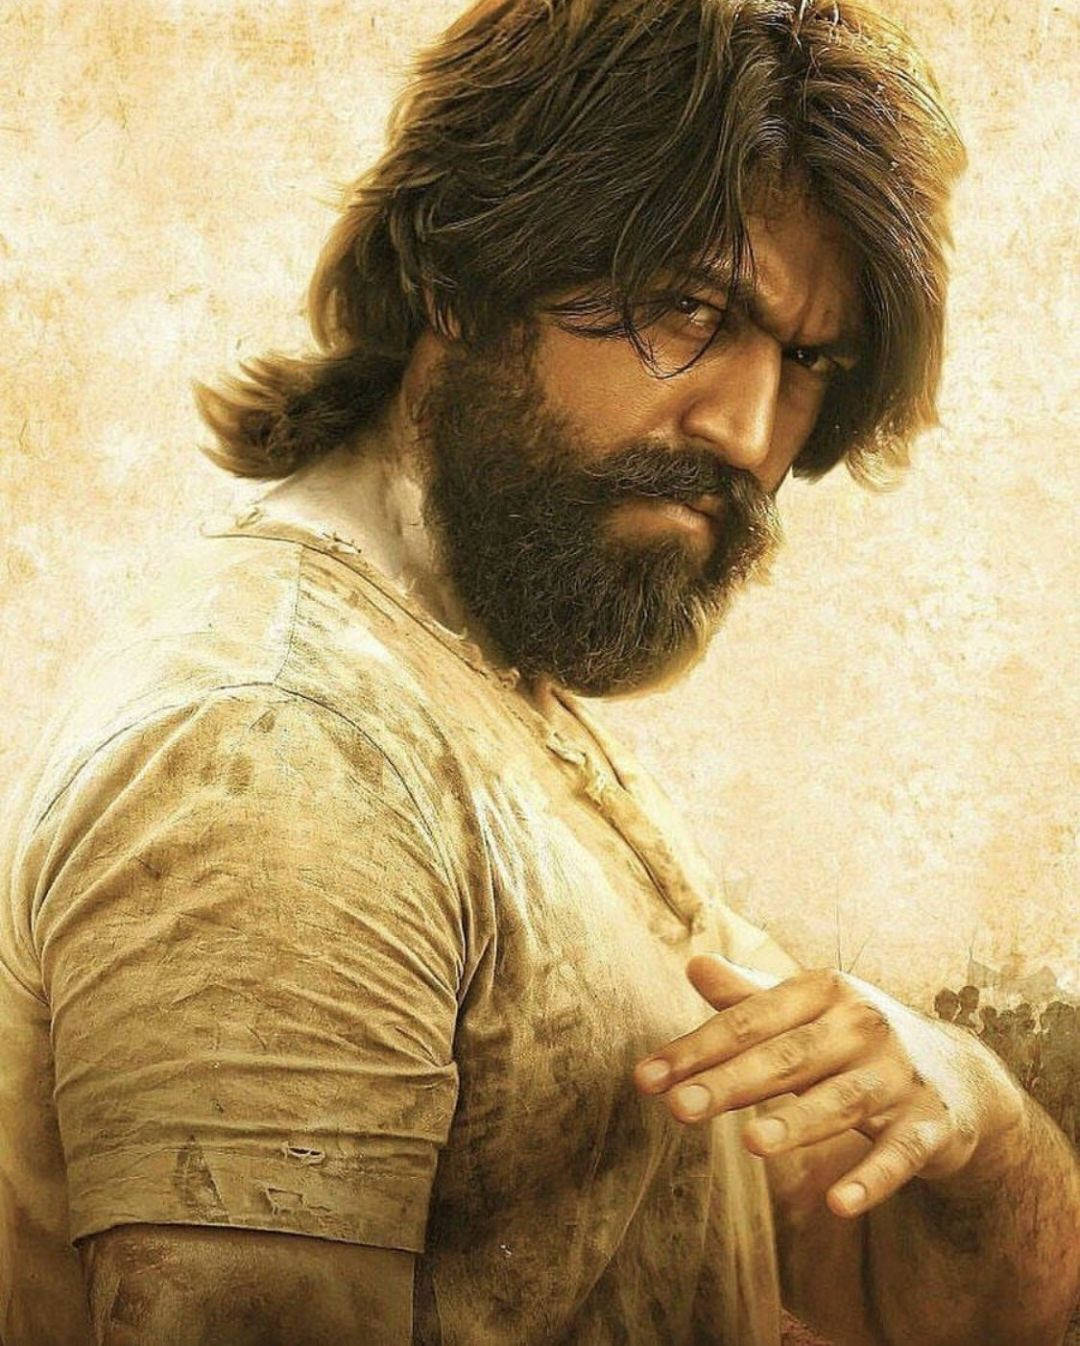 Kgf Rocky In Slave Clothes Background